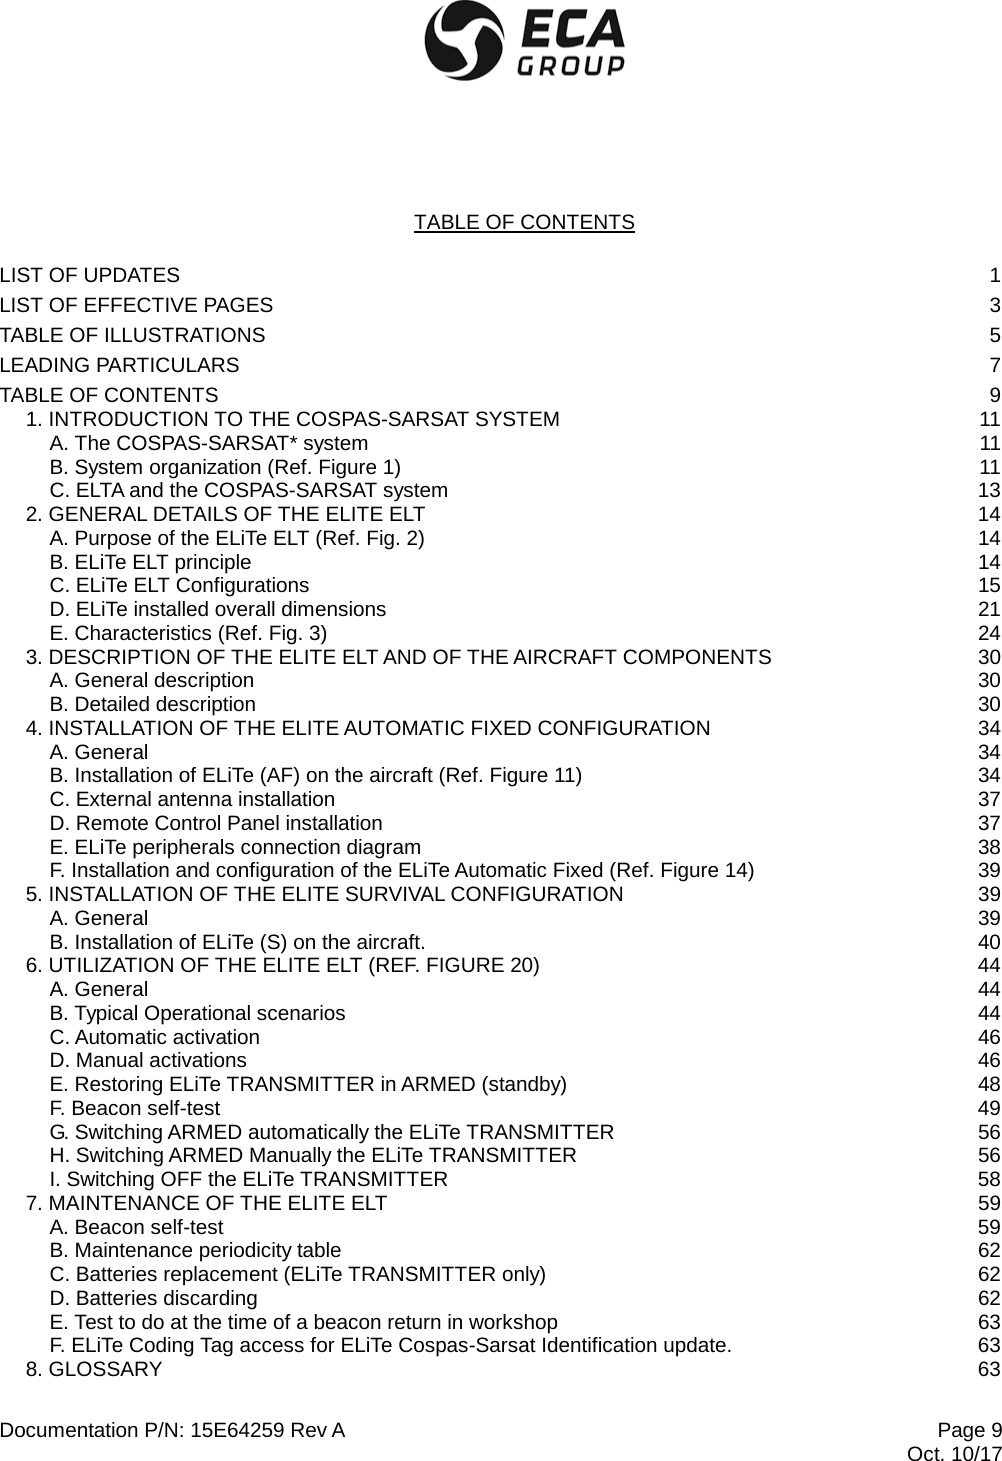  Documentation P/N: 15E64259 Rev A Page 9    Oct. 10/17 TABLE OF CONTENTS  LIST OF UPDATES  1 LIST OF EFFECTIVE PAGES  3 TABLE OF ILLUSTRATIONS  5 LEADING PARTICULARS  7 TABLE OF CONTENTS  9 1. INTRODUCTION TO THE COSPAS-SARSAT SYSTEM 11 A. The COSPAS-SARSAT* system 11 B. System organization (Ref. Figure 1) 11 C. ELTA and the COSPAS-SARSAT system 13 2. GENERAL DETAILS OF THE ELITE ELT 14 A. Purpose of the ELiTe ELT (Ref. Fig. 2) 14 B. ELiTe ELT principle 14 C. ELiTe ELT Configurations 15 D. ELiTe installed overall dimensions 21 E. Characteristics (Ref. Fig. 3) 24 3. DESCRIPTION OF THE ELITE ELT AND OF THE AIRCRAFT COMPONENTS 30 A. General description 30 B. Detailed description 30 4. INSTALLATION OF THE ELITE AUTOMATIC FIXED CONFIGURATION 34 A. General 34 B. Installation of ELiTe (AF) on the aircraft (Ref. Figure 11) 34 C. External antenna installation 37 D. Remote Control Panel installation 37 E. ELiTe peripherals connection diagram 38 F. Installation and configuration of the ELiTe Automatic Fixed (Ref. Figure 14) 39 5. INSTALLATION OF THE ELITE SURVIVAL CONFIGURATION 39 A. General 39 B. Installation of ELiTe (S) on the aircraft. 40 6. UTILIZATION OF THE ELITE ELT (REF. FIGURE 20) 44 A. General 44 B. Typical Operational scenarios 44 C. Automatic activation 46 D. Manual activations 46 E. Restoring ELiTe TRANSMITTER in ARMED (standby) 48 F. Beacon self-test 49 G. Switching ARMED automatically the ELiTe TRANSMITTER 56 H. Switching ARMED Manually the ELiTe TRANSMITTER 56 I. Switching OFF the ELiTe TRANSMITTER 58 7. MAINTENANCE OF THE ELITE ELT 59 A. Beacon self-test 59 B. Maintenance periodicity table 62 C. Batteries replacement (ELiTe TRANSMITTER only) 62 D. Batteries discarding 62 E. Test to do at the time of a beacon return in workshop 63 F. ELiTe Coding Tag access for ELiTe Cospas-Sarsat Identification update. 63 8. GLOSSARY 63  